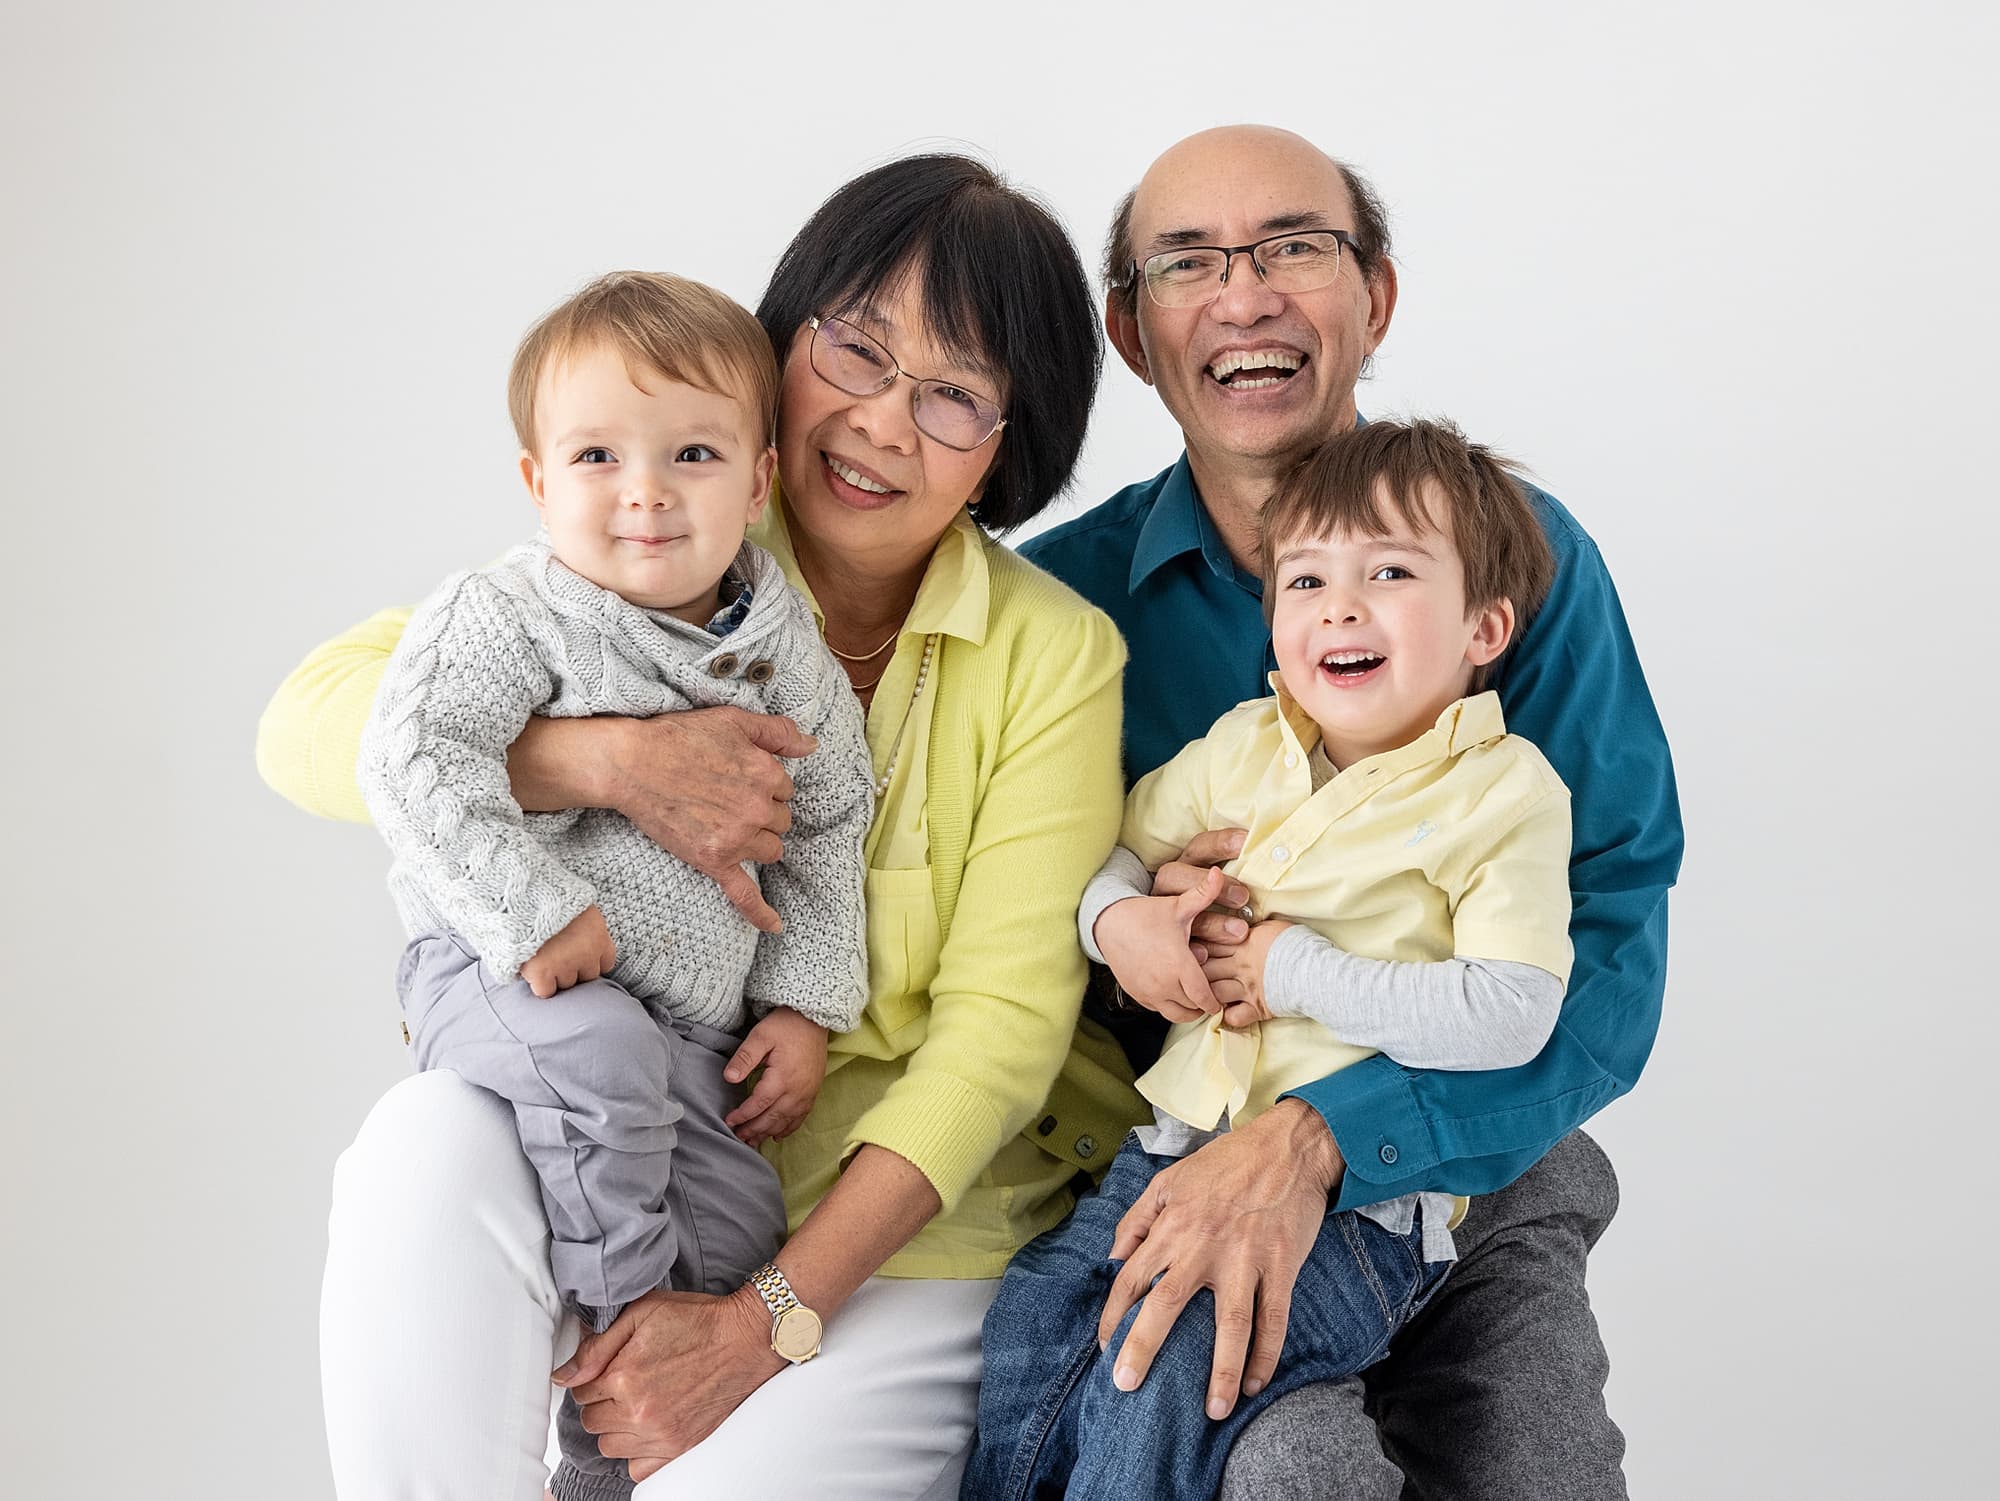 Grandparents and Grandkids smiling during a family portrait shoot